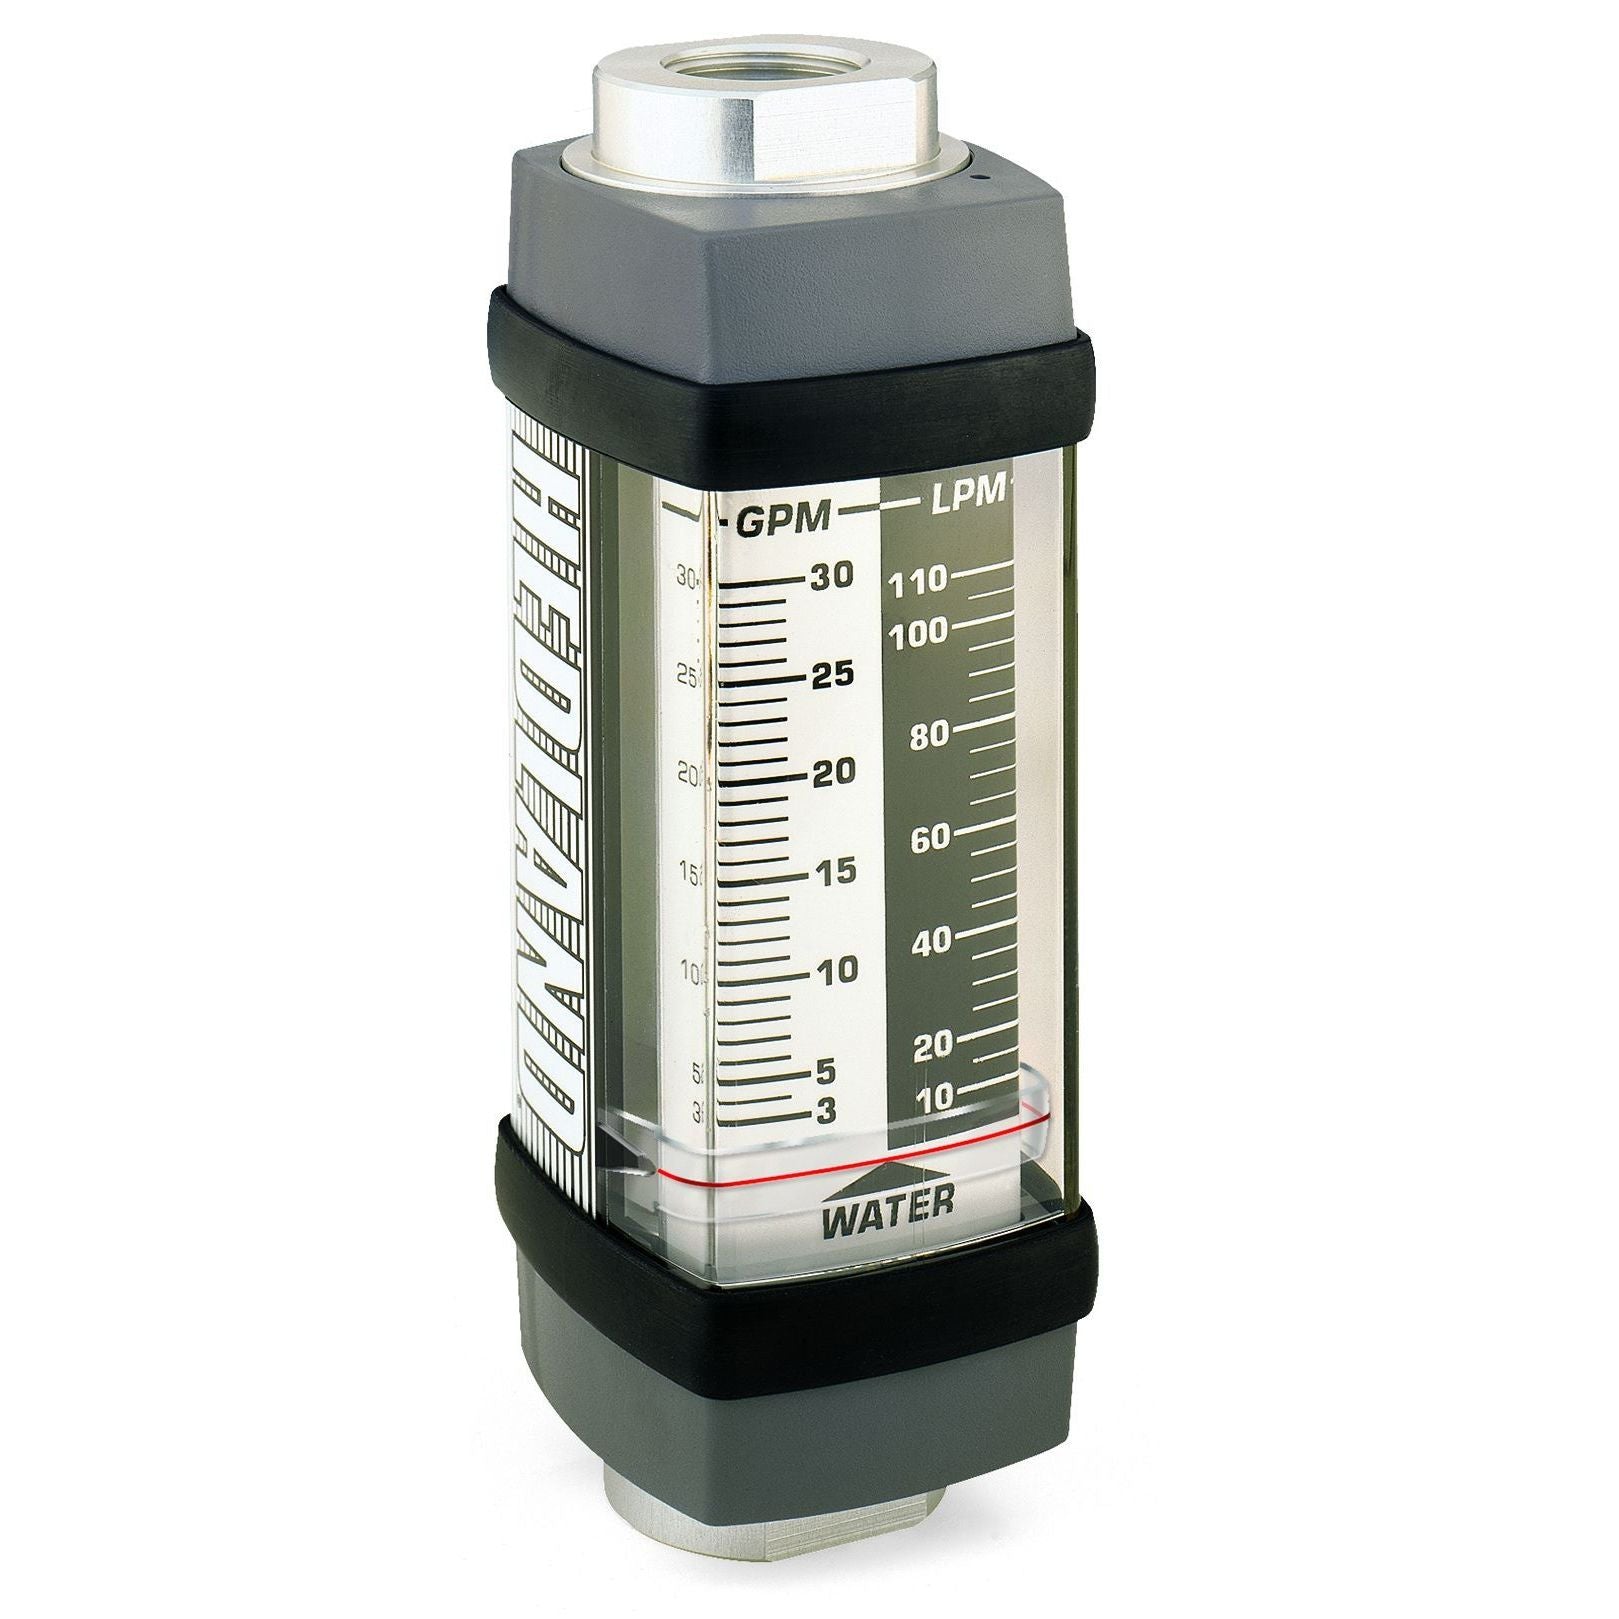 H231X-020 : Hedland 6000psi 316SS Flow Meter for Caustic or Corrosive Liquids, 1/4 NPT, 0.2 to 2.0 GPM